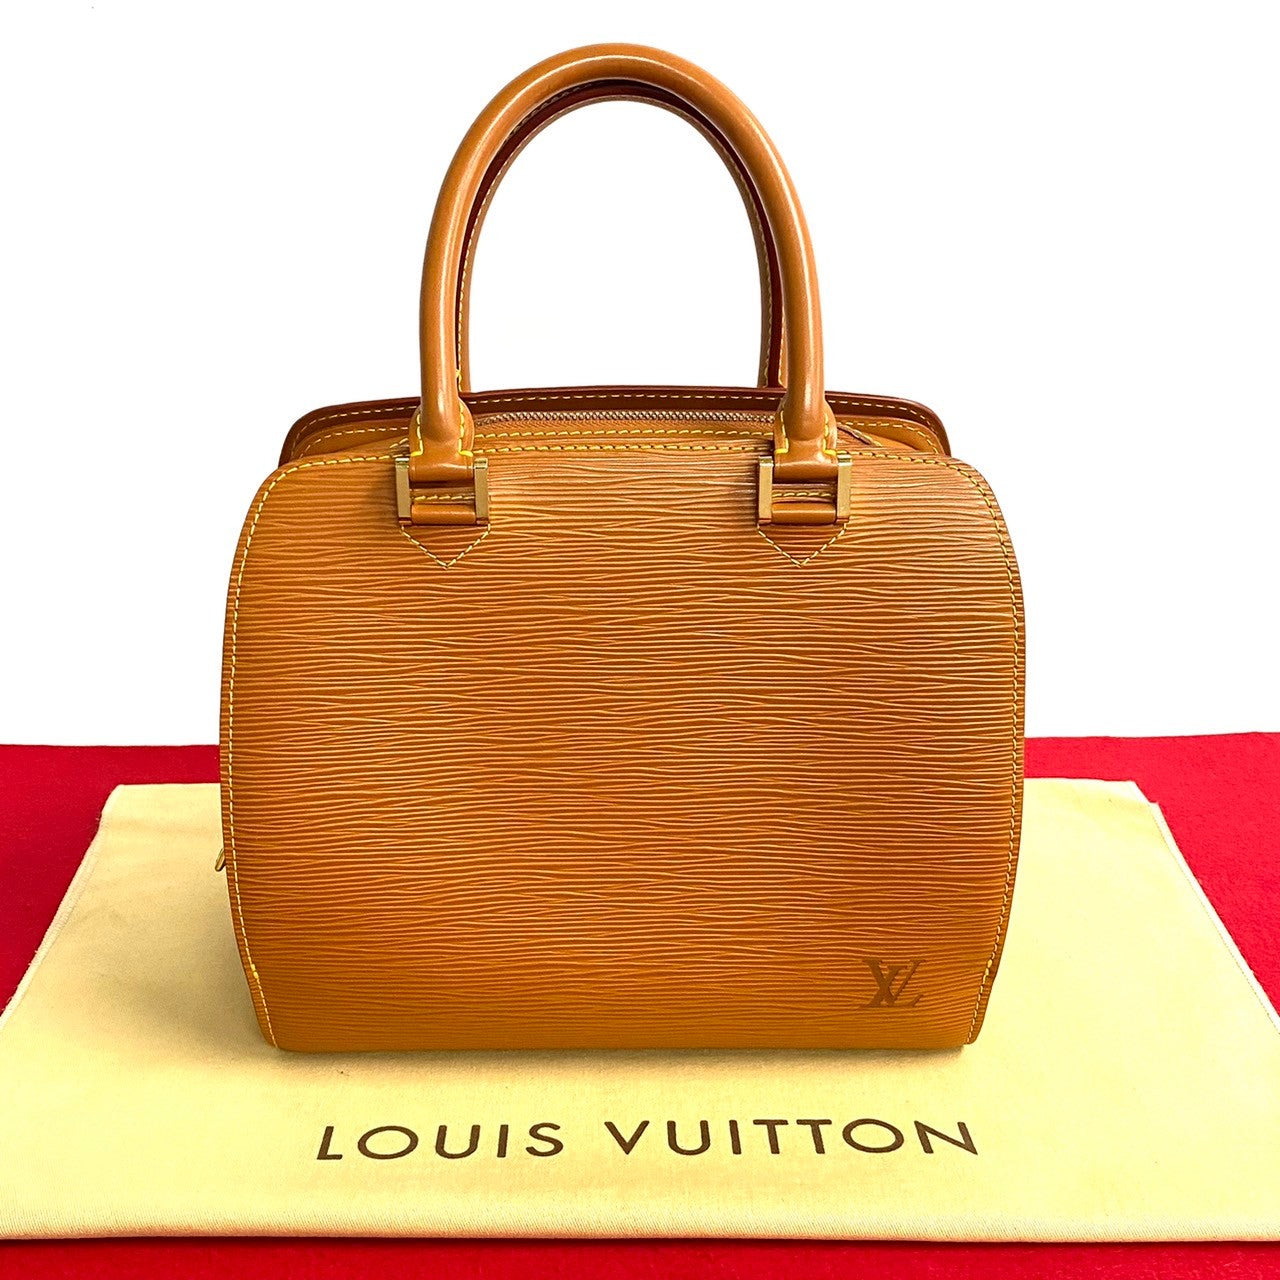 Louis Vuitton Pont Neuf Hand Bag Leather Handbag M52059 in Excellent condition